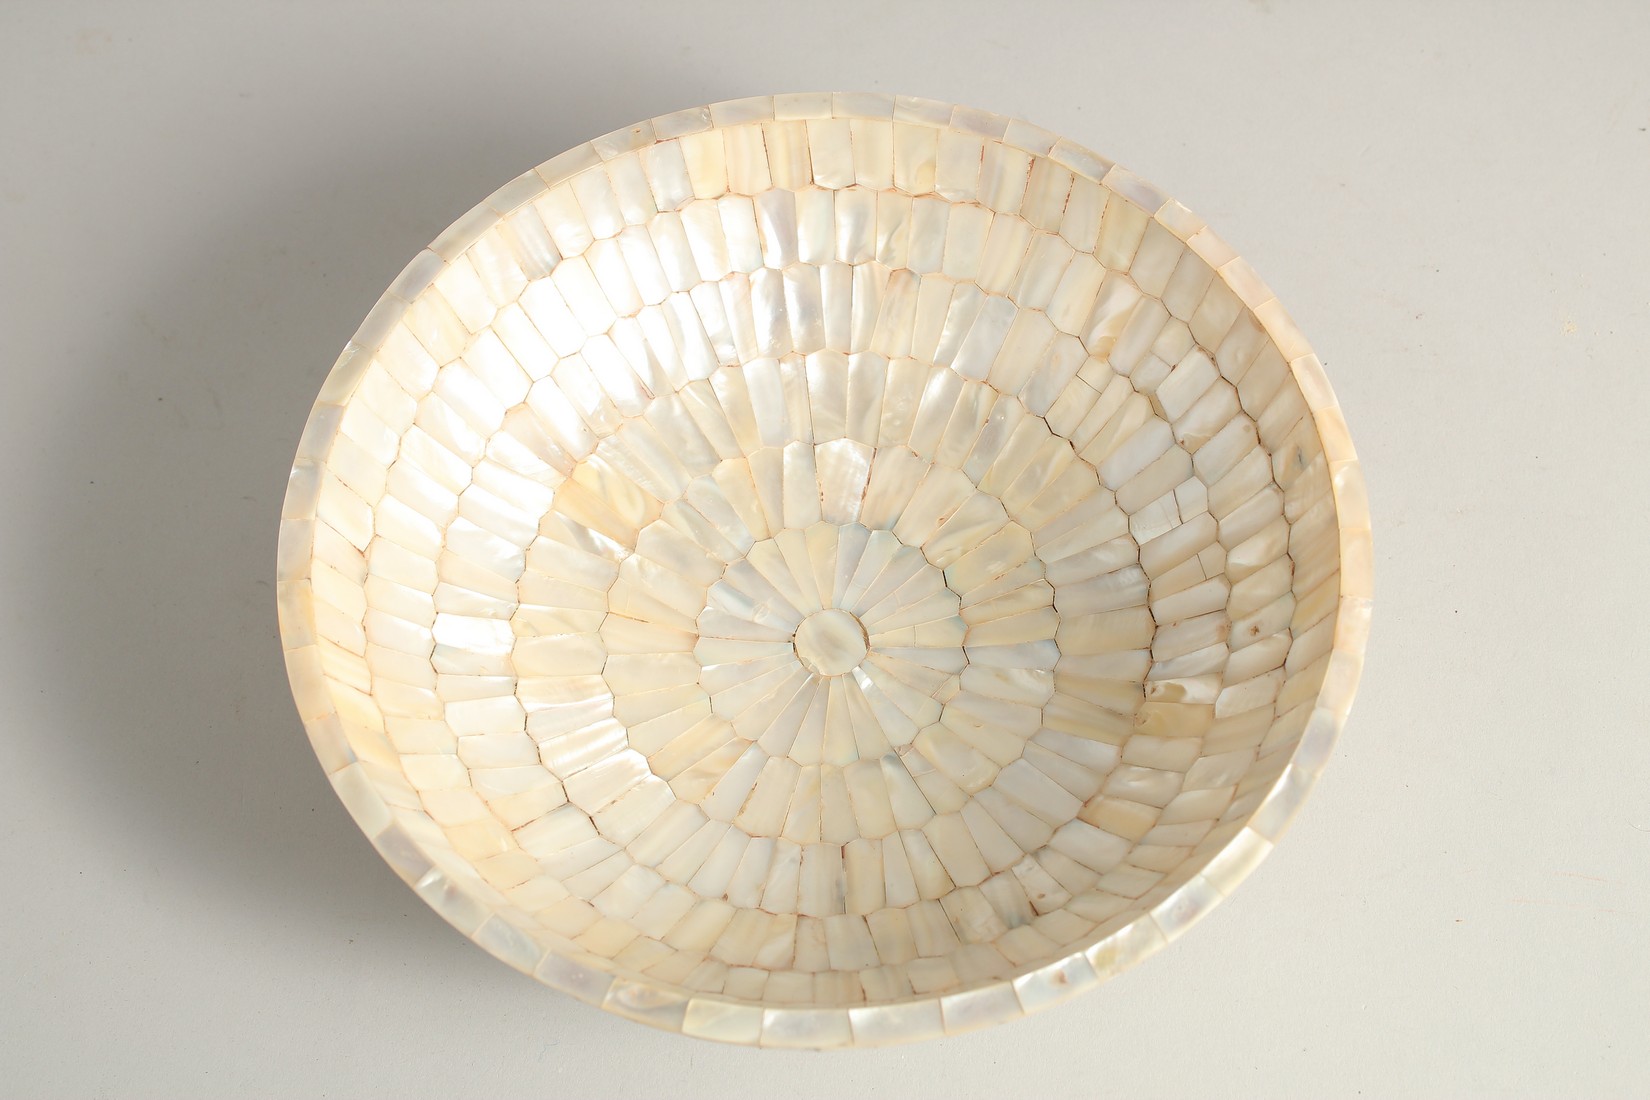 A LARGE MOTHER OF PEARL BOWL, 26cm diameter. - Image 2 of 3